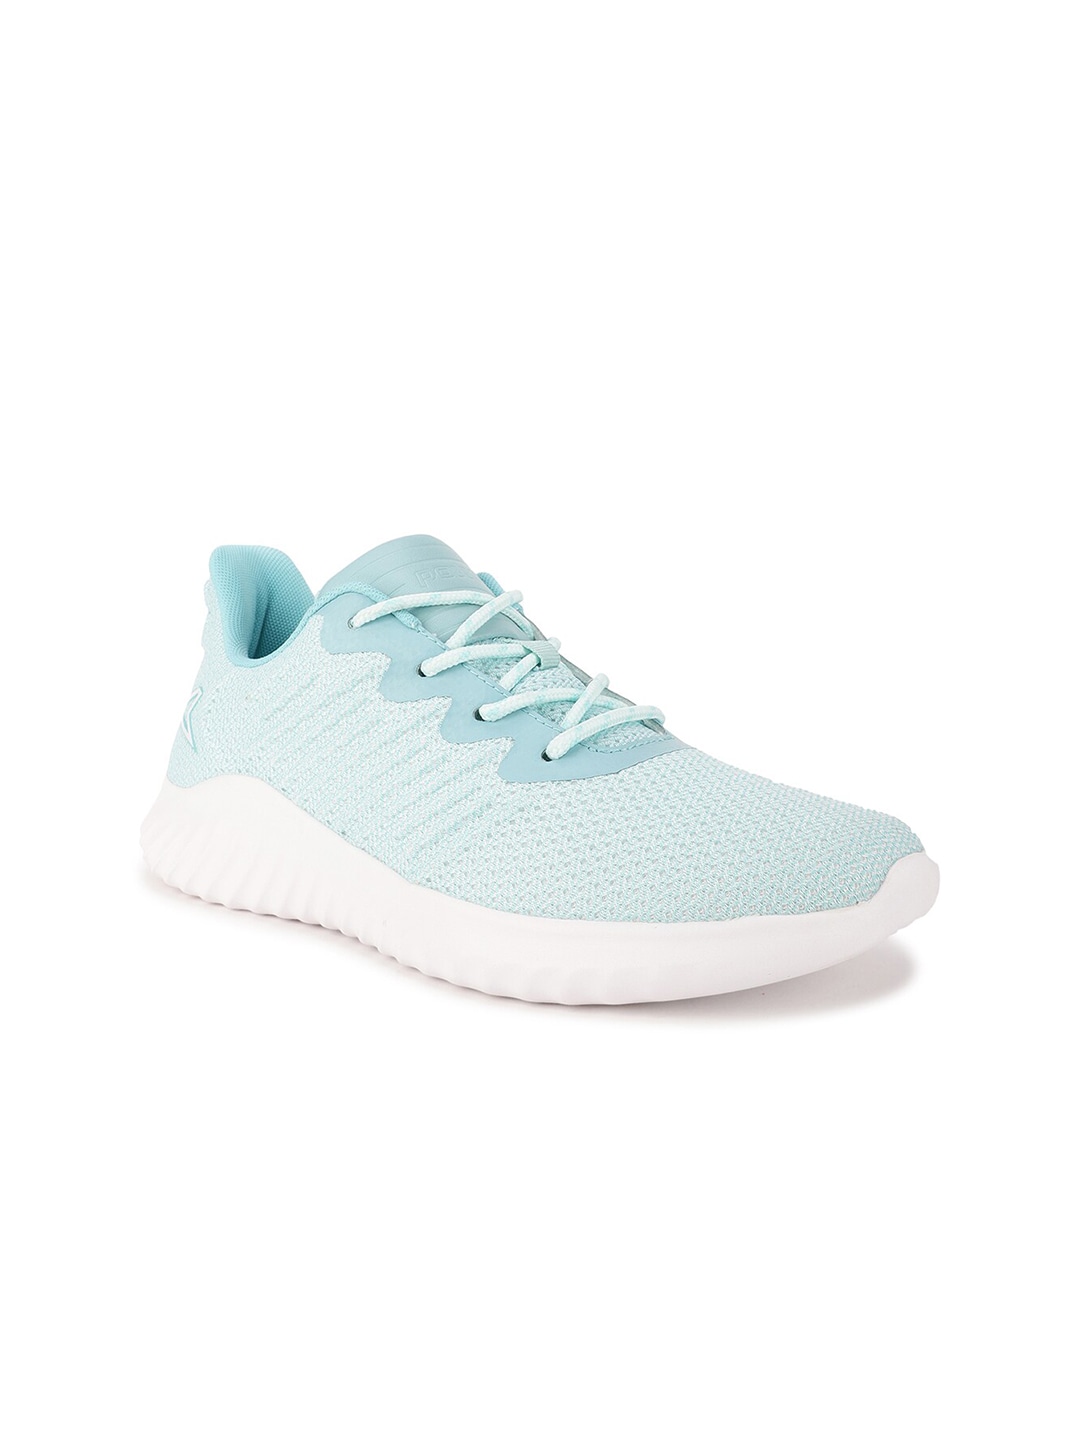 Power Women Blue Textile Running Non-Marking Shoes Price in India